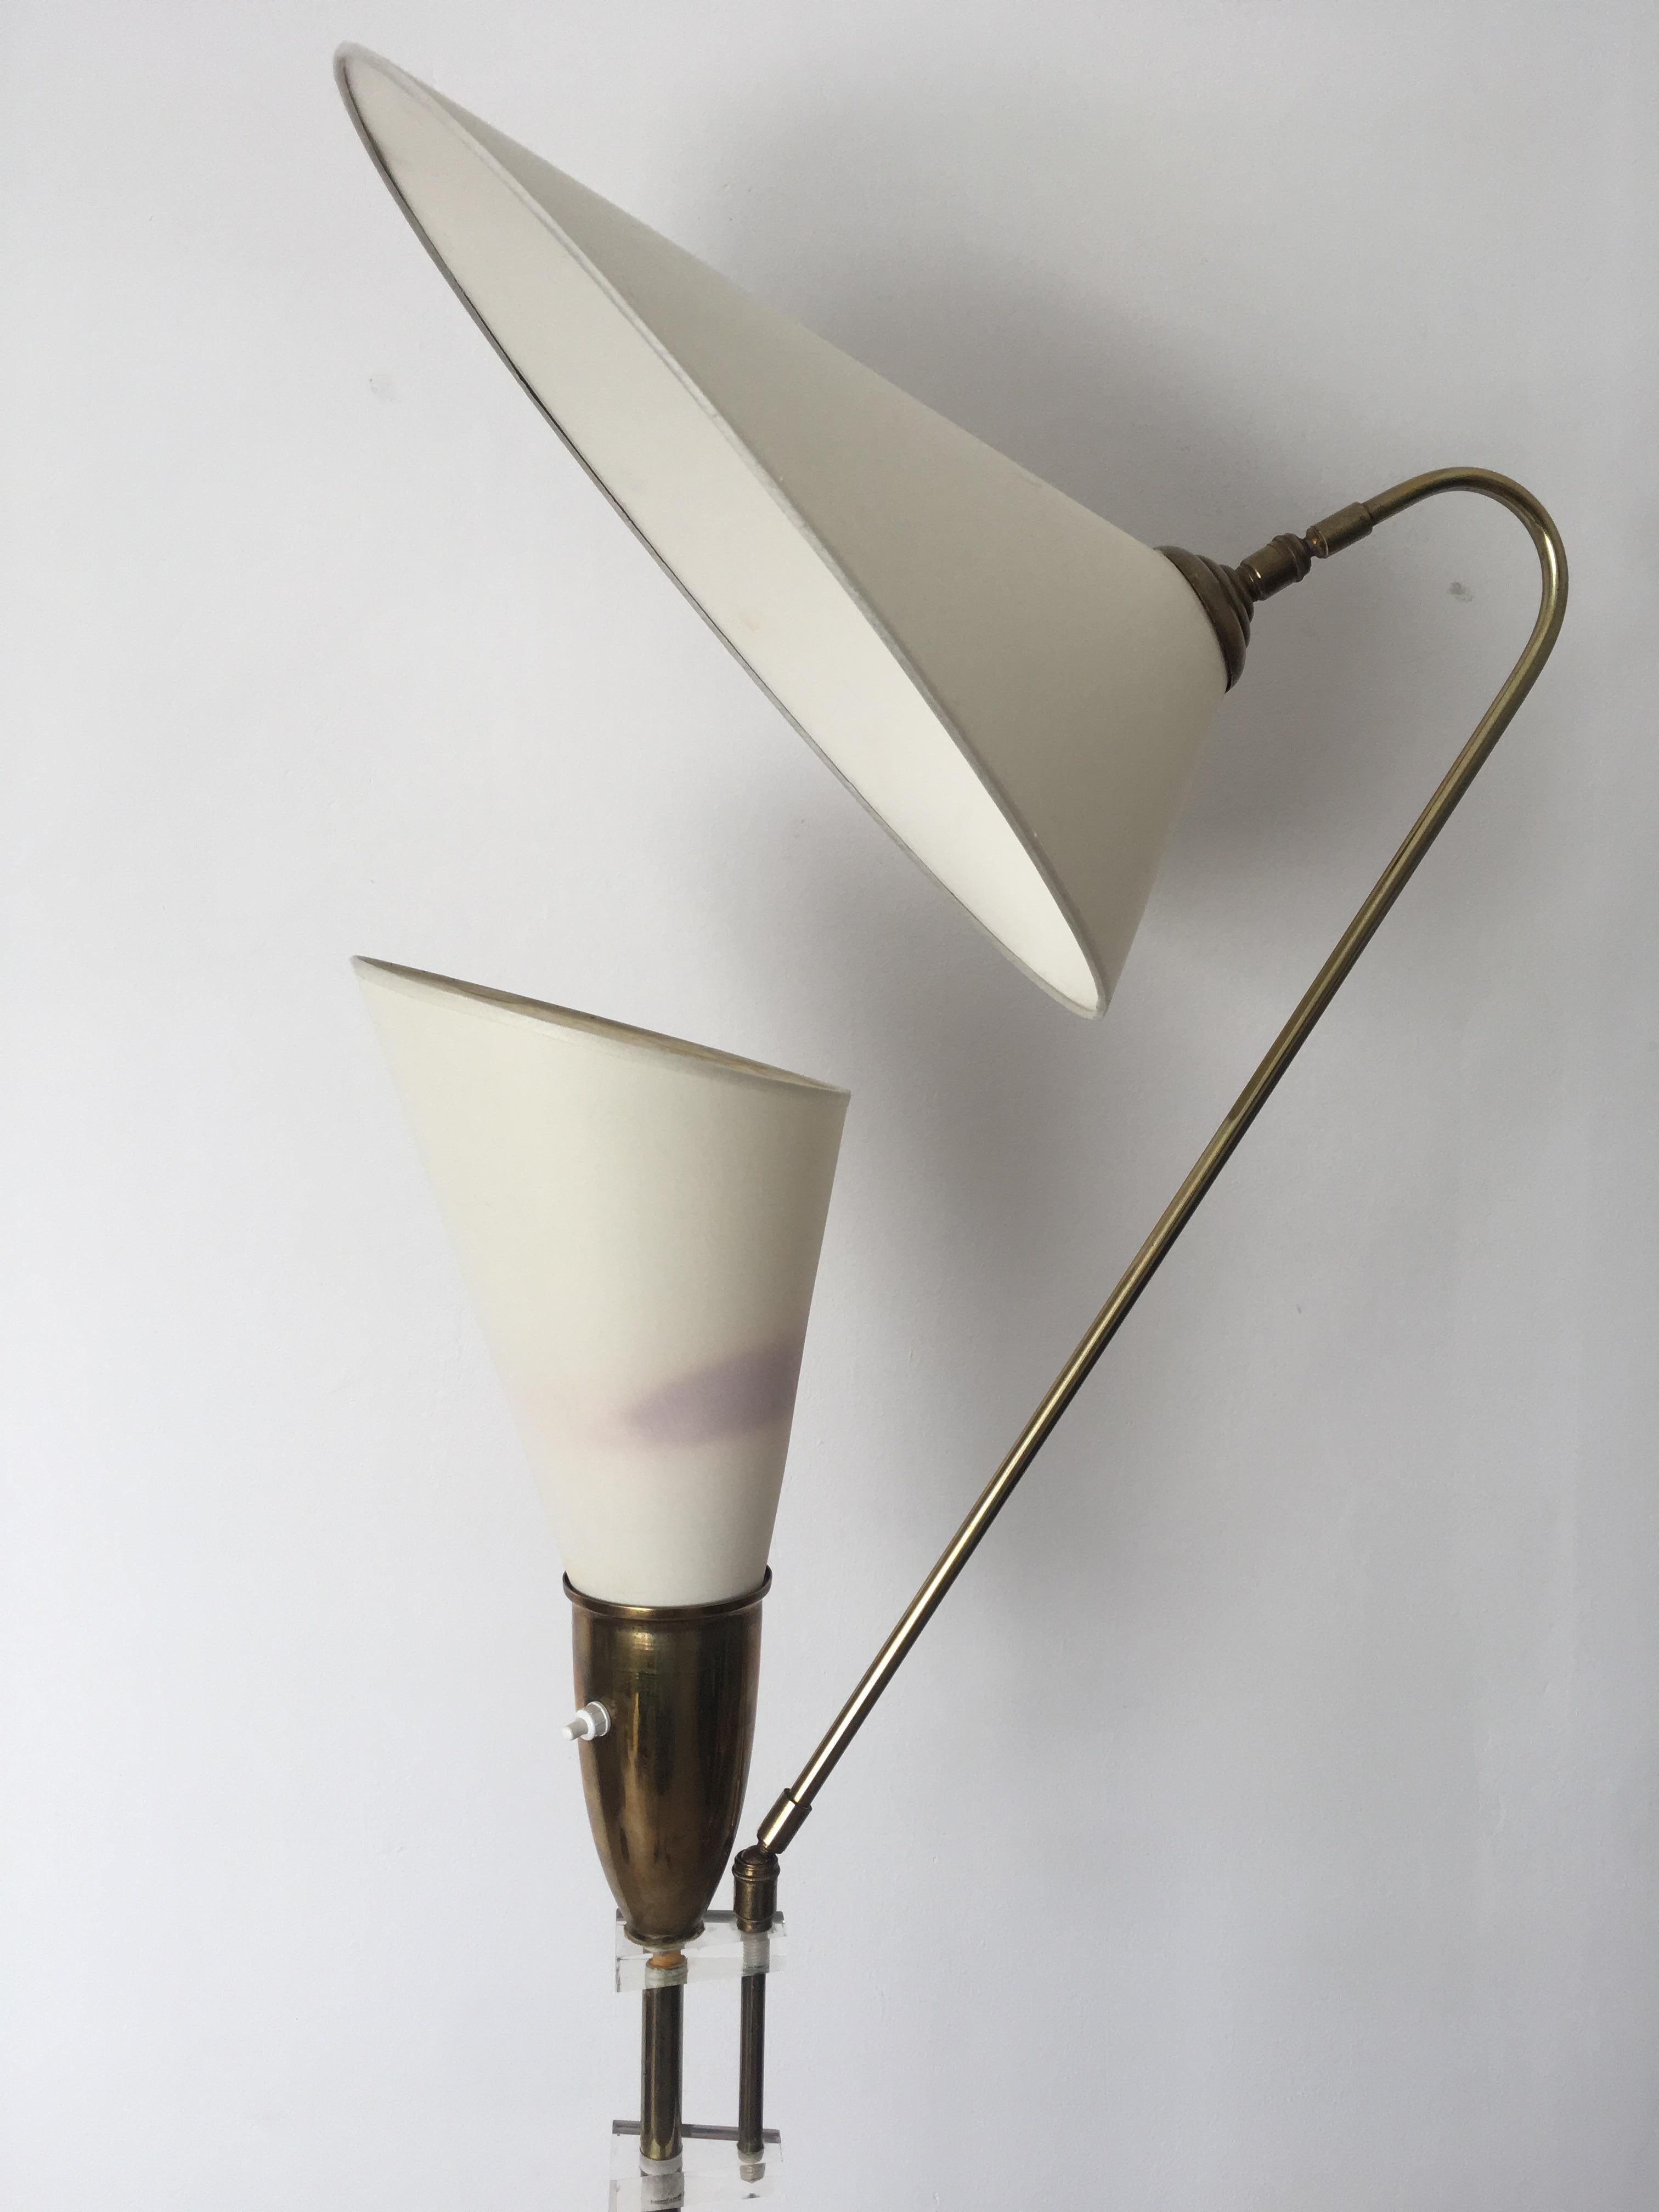 Angelo Lelli Attributed Brass and Plexiglass Floor Lamp, Arredoluce, Italy 1950s For Sale 12